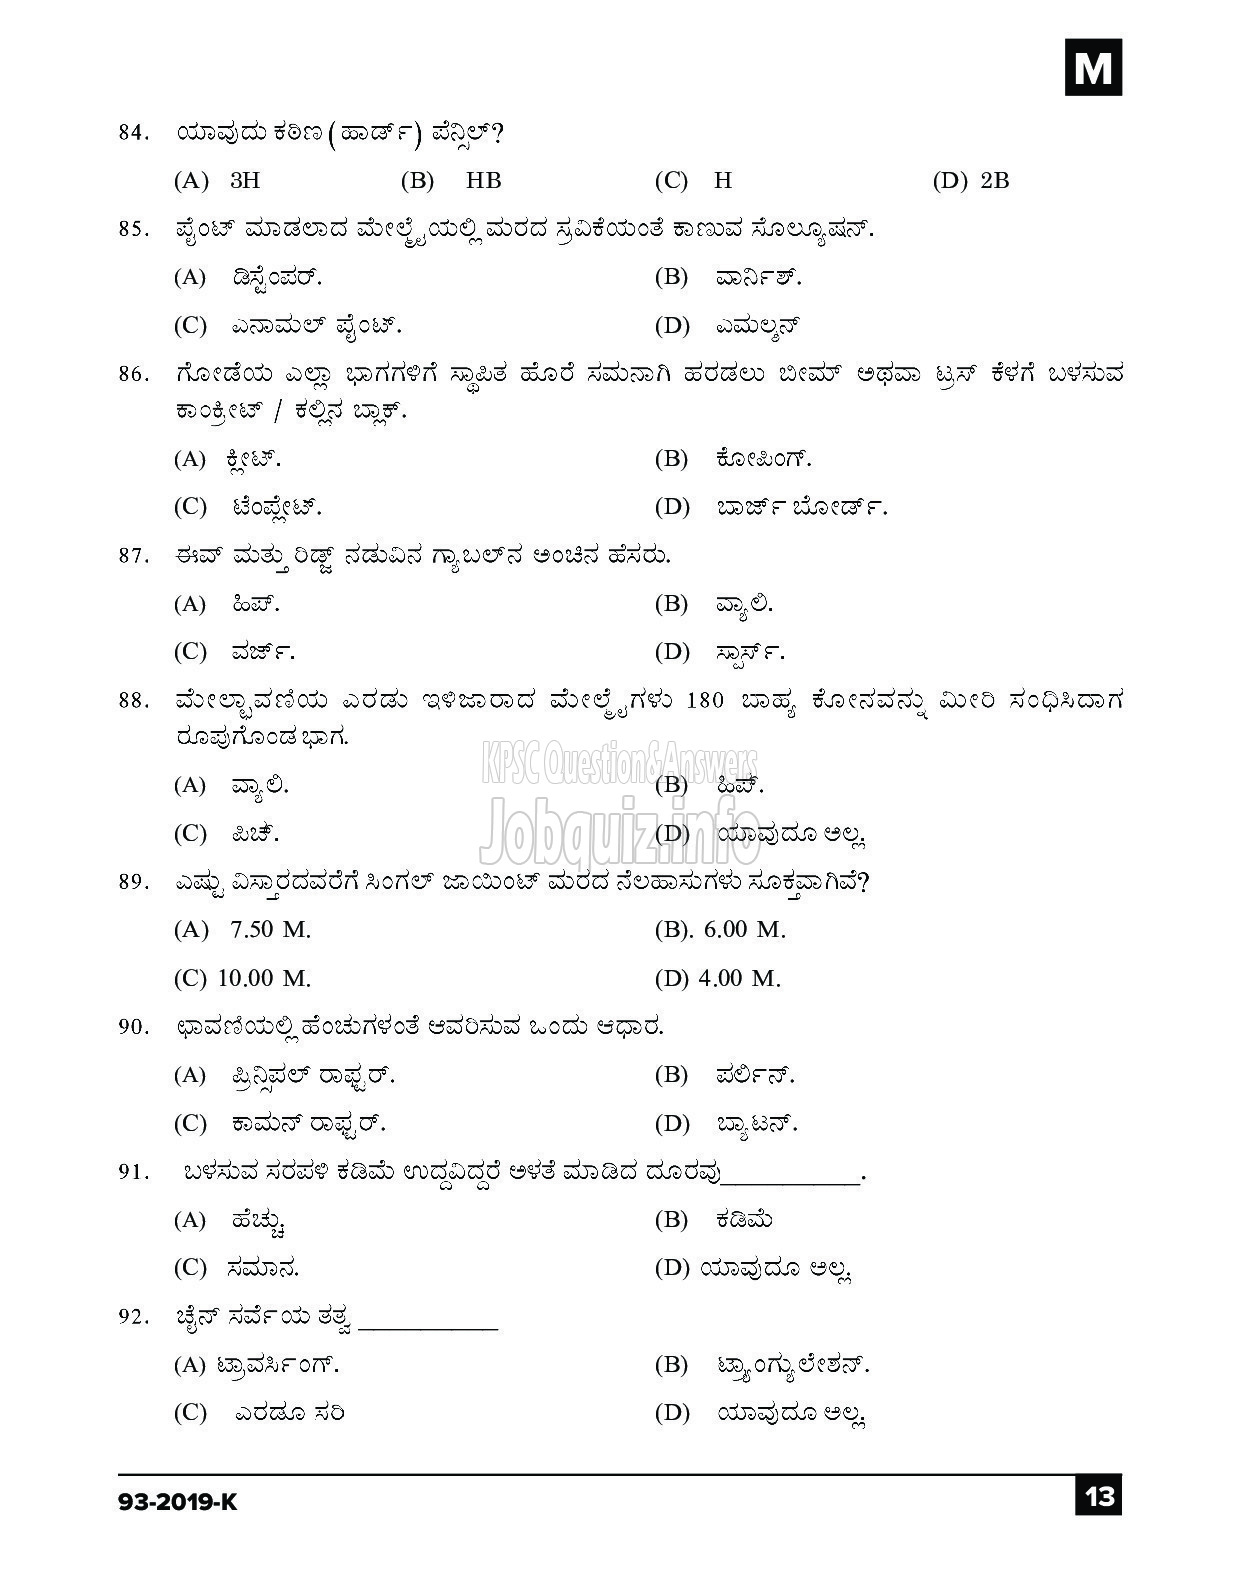 Kerala PSC Question Paper - Workshop Attender (Architectural Assistant) SR From SC/ST Industrial Training KANNADA-13